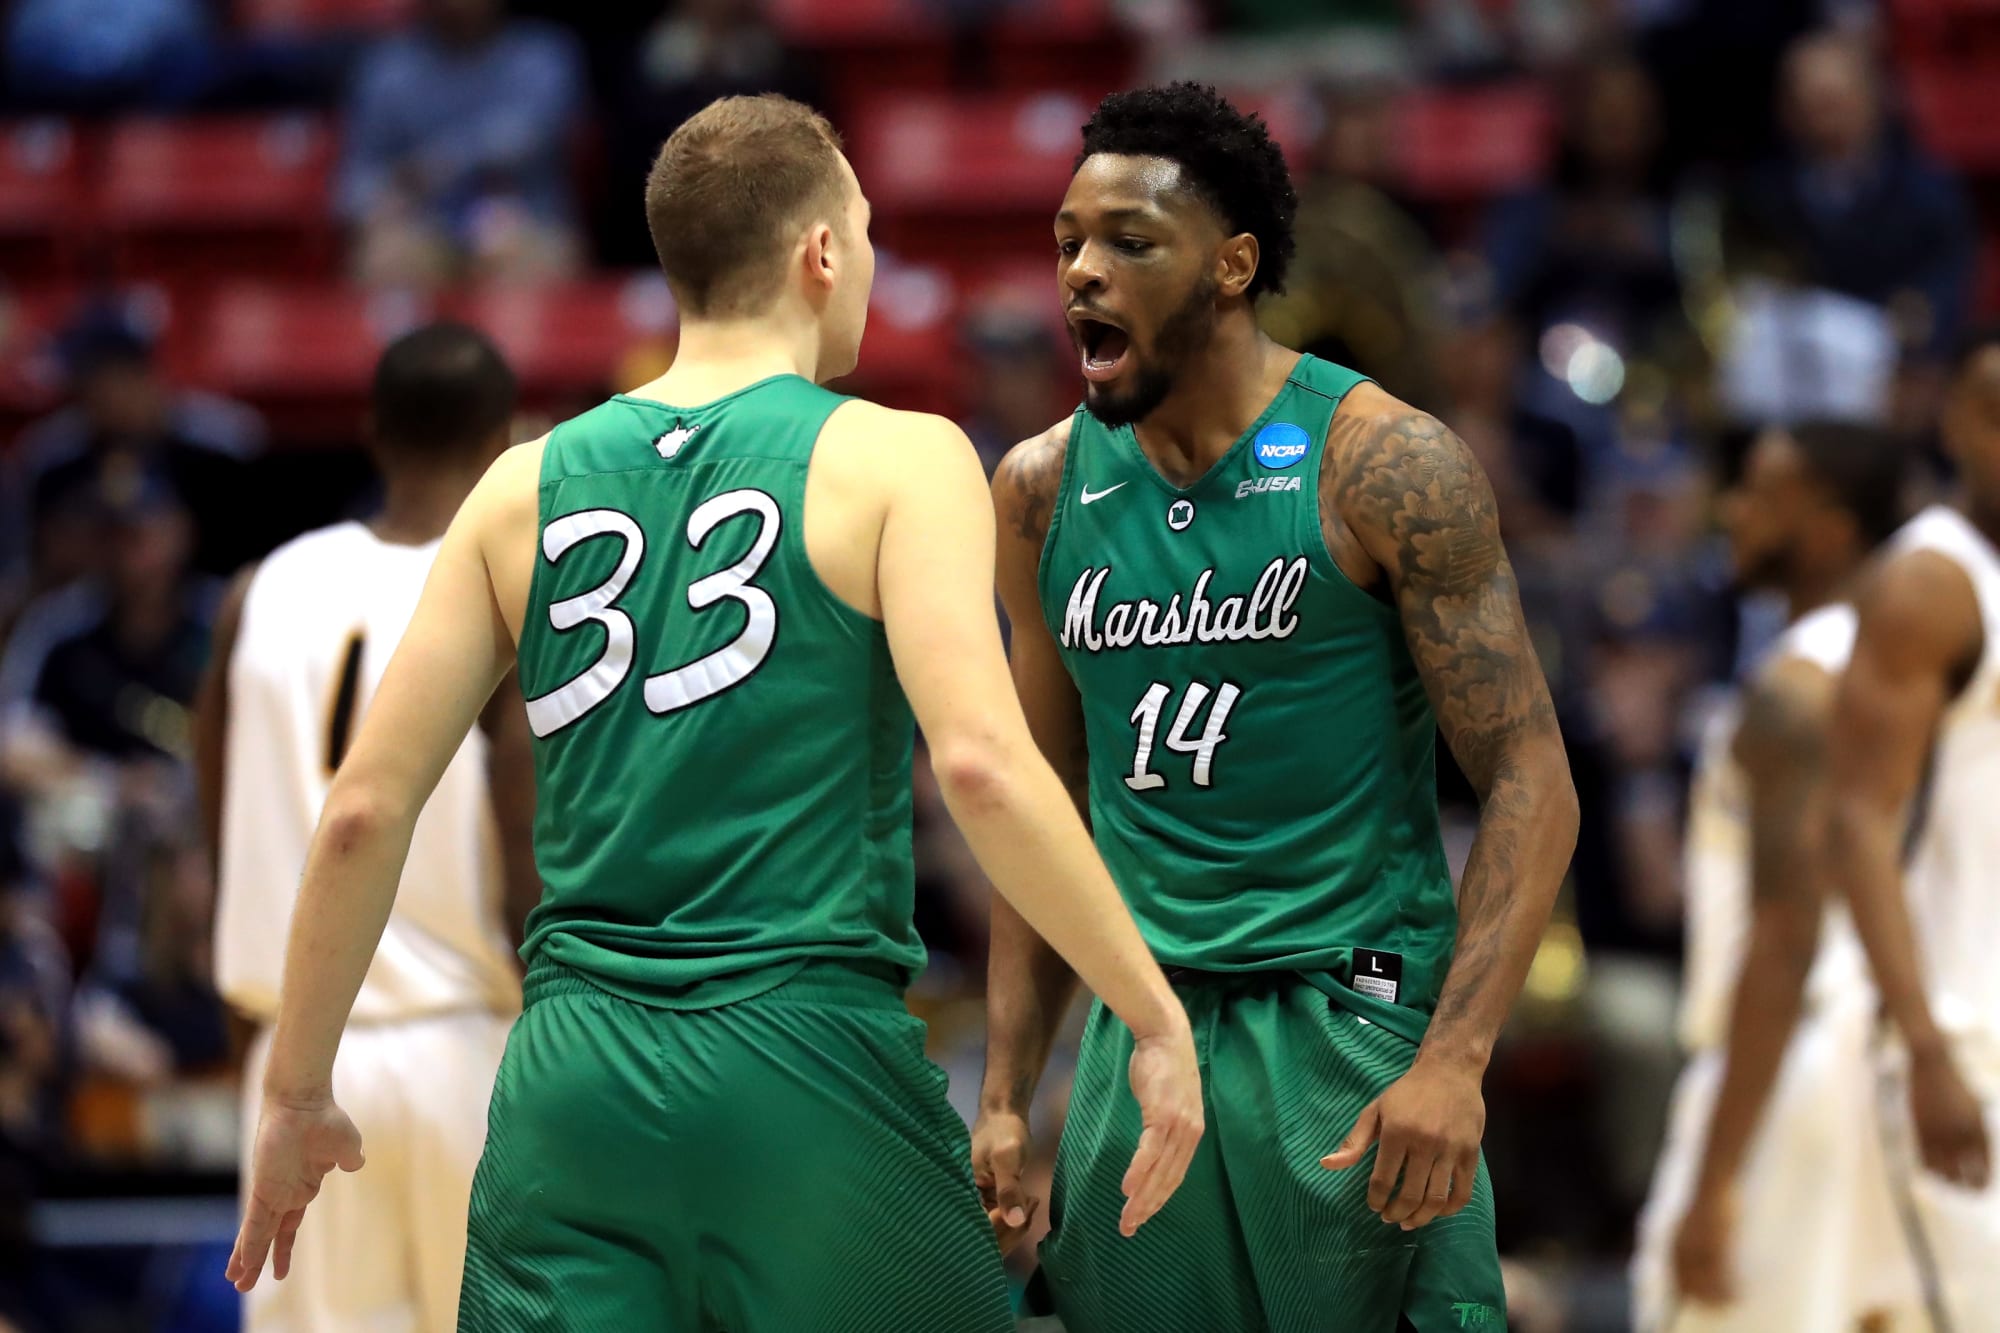 Conference USA Basketball: Wild conference tournament approaches